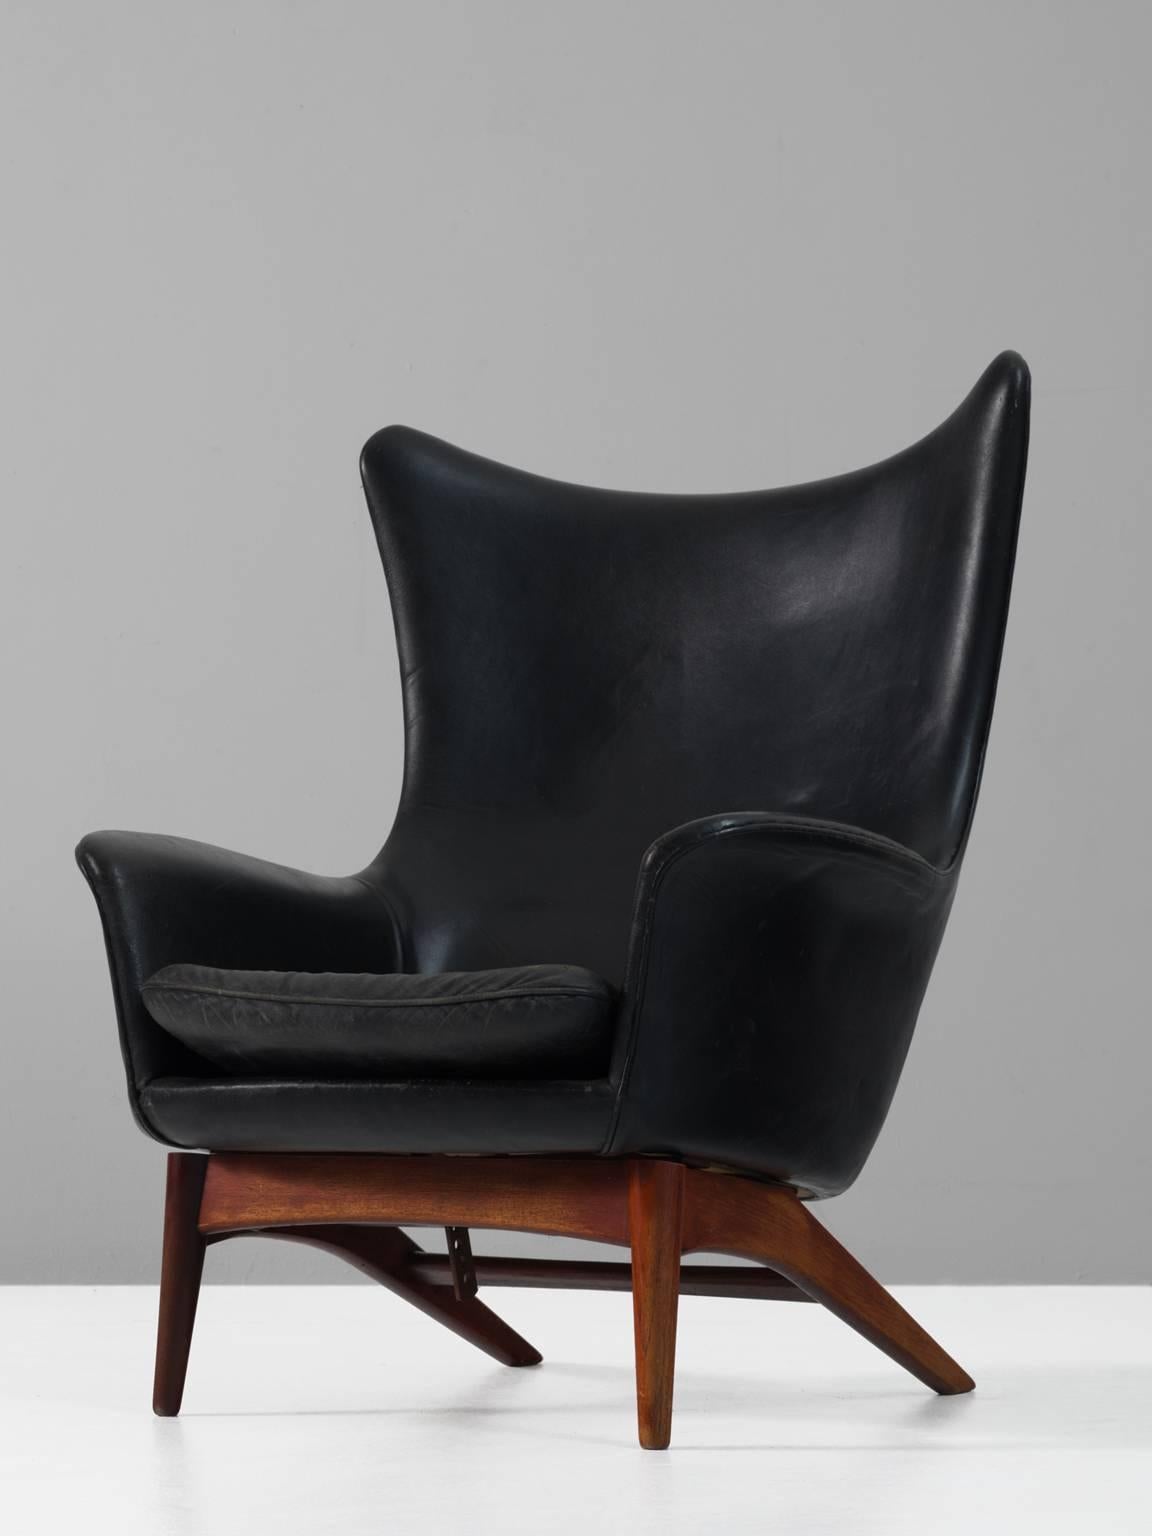 Wingback chair, in teak and leather, by H.W. Klein for Bramin, Denmark, 1950s. 

Sculptural lounge chair by Henry Walter Klein. This wingback chair is a great example of Scandinavian design and comfort. Beautiful organic formed seating, with solid